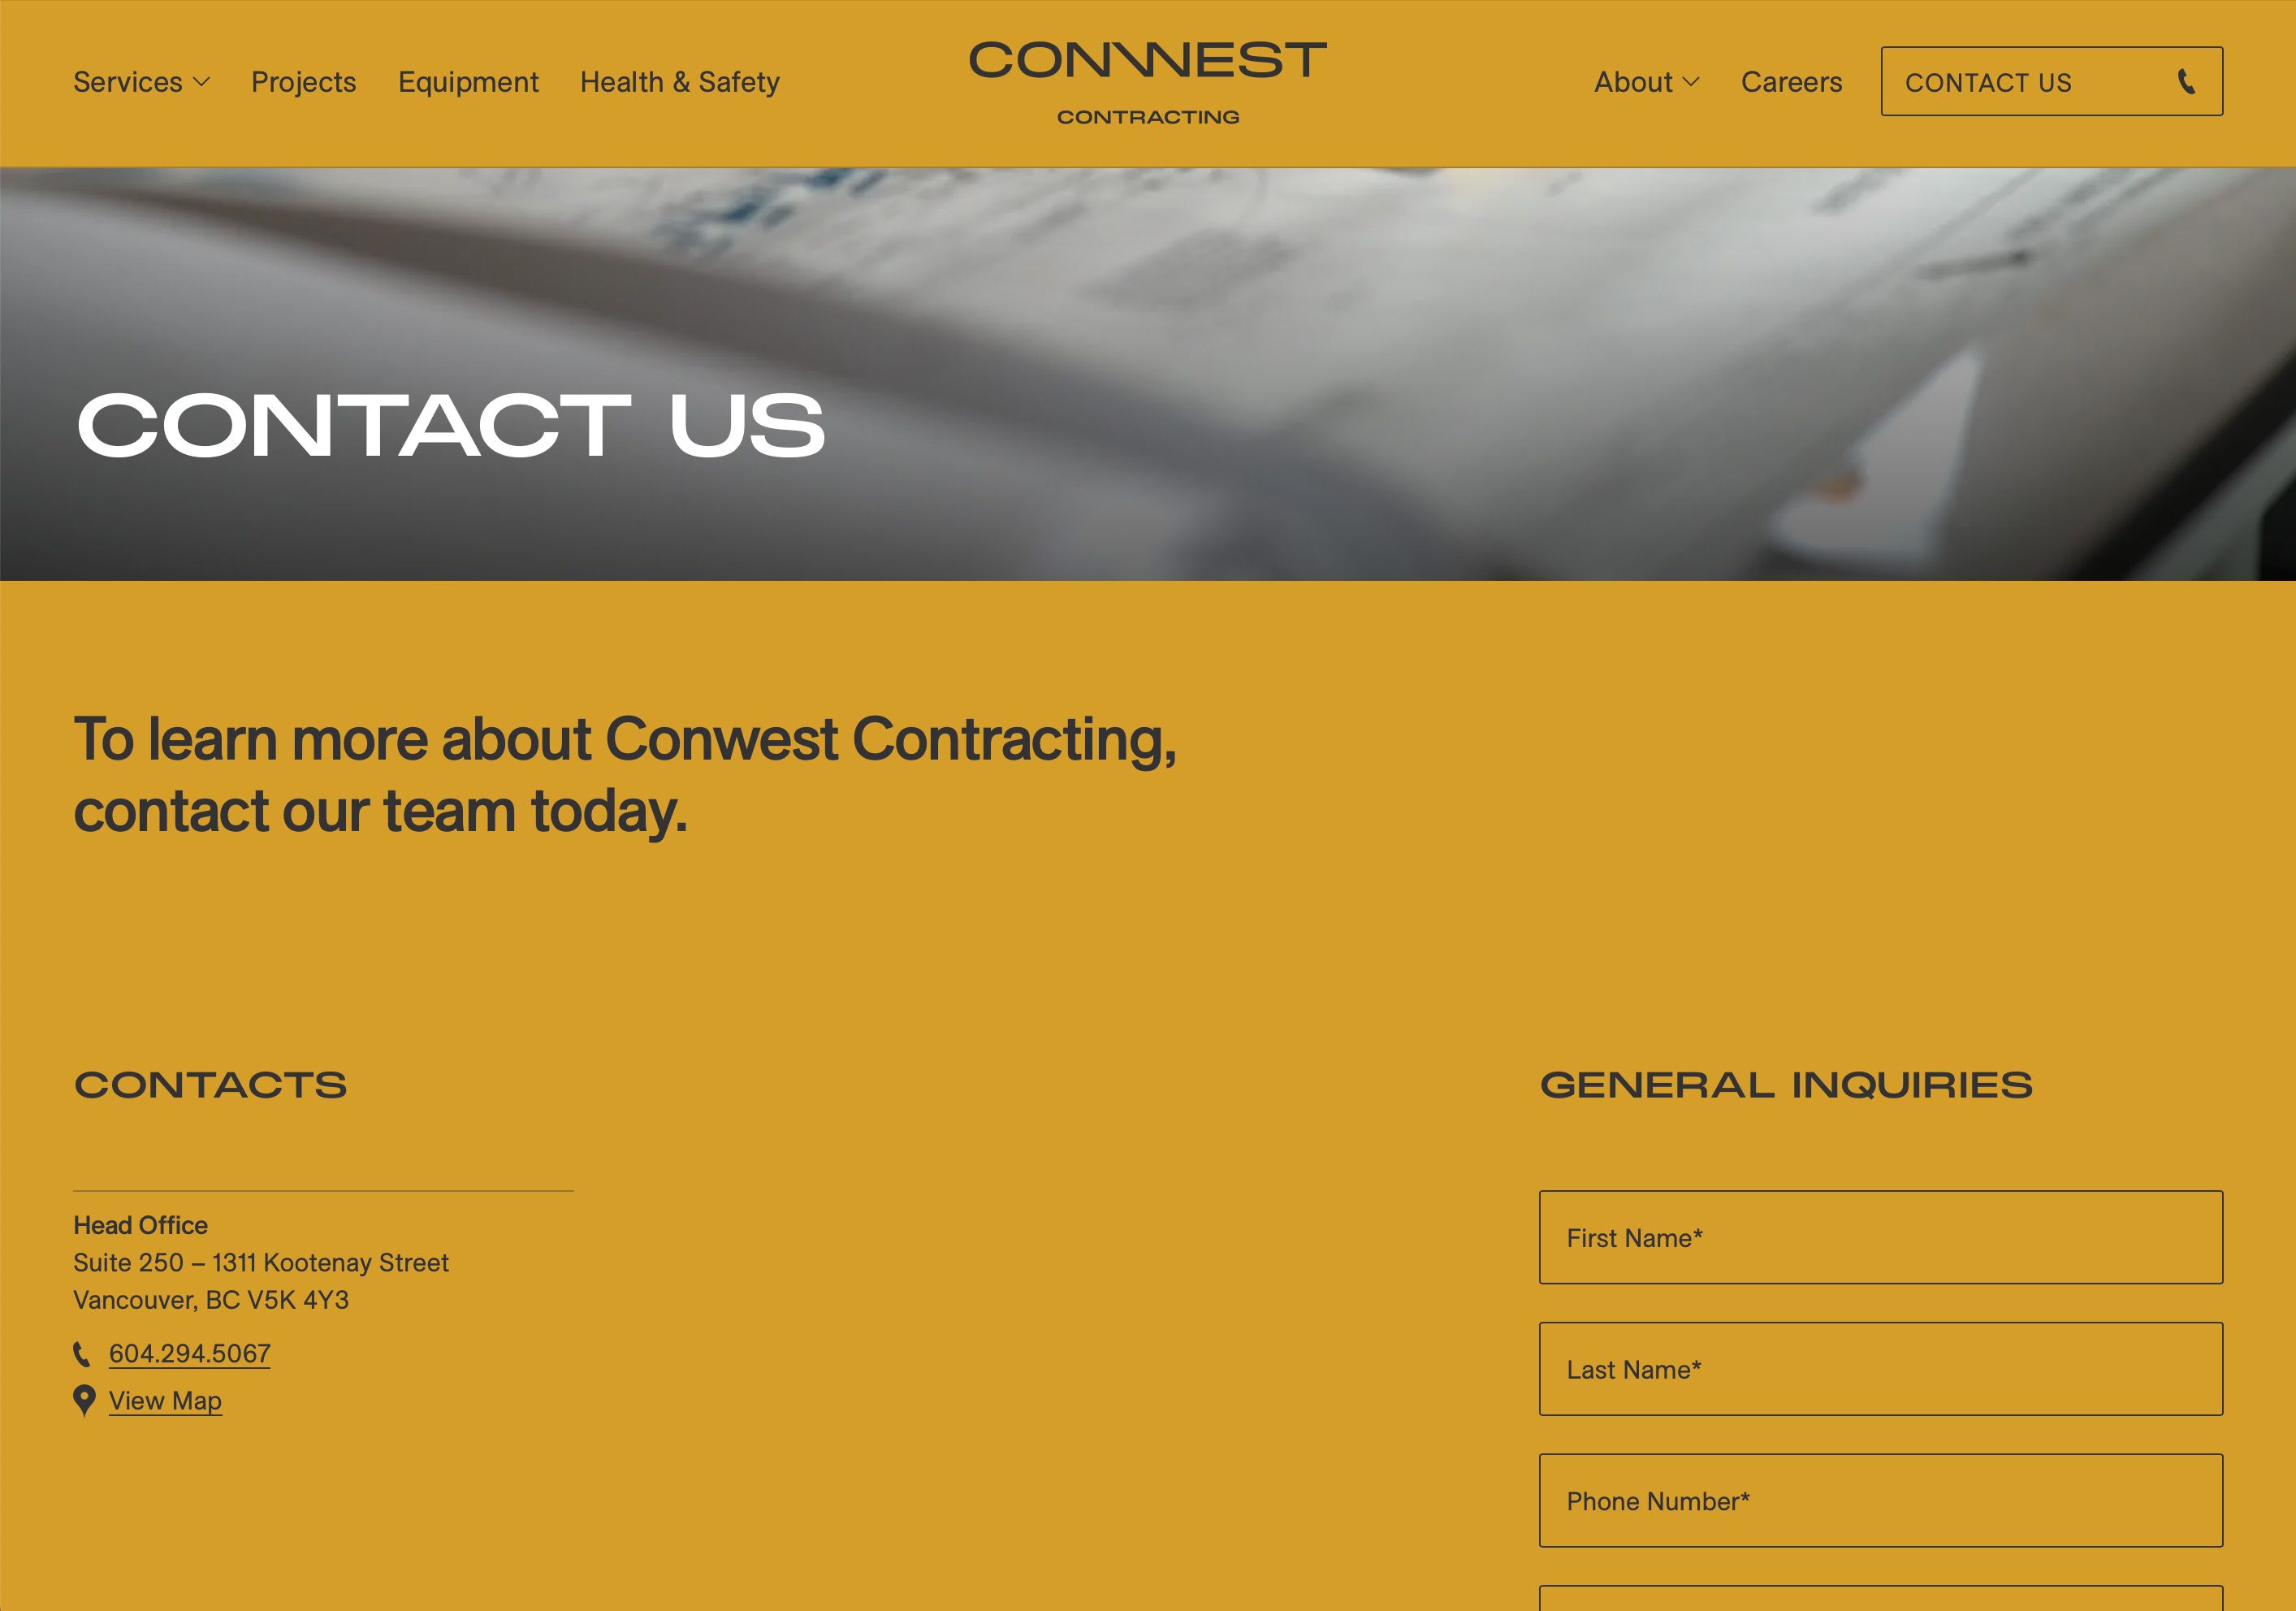 Conwest Contracting website, contact page